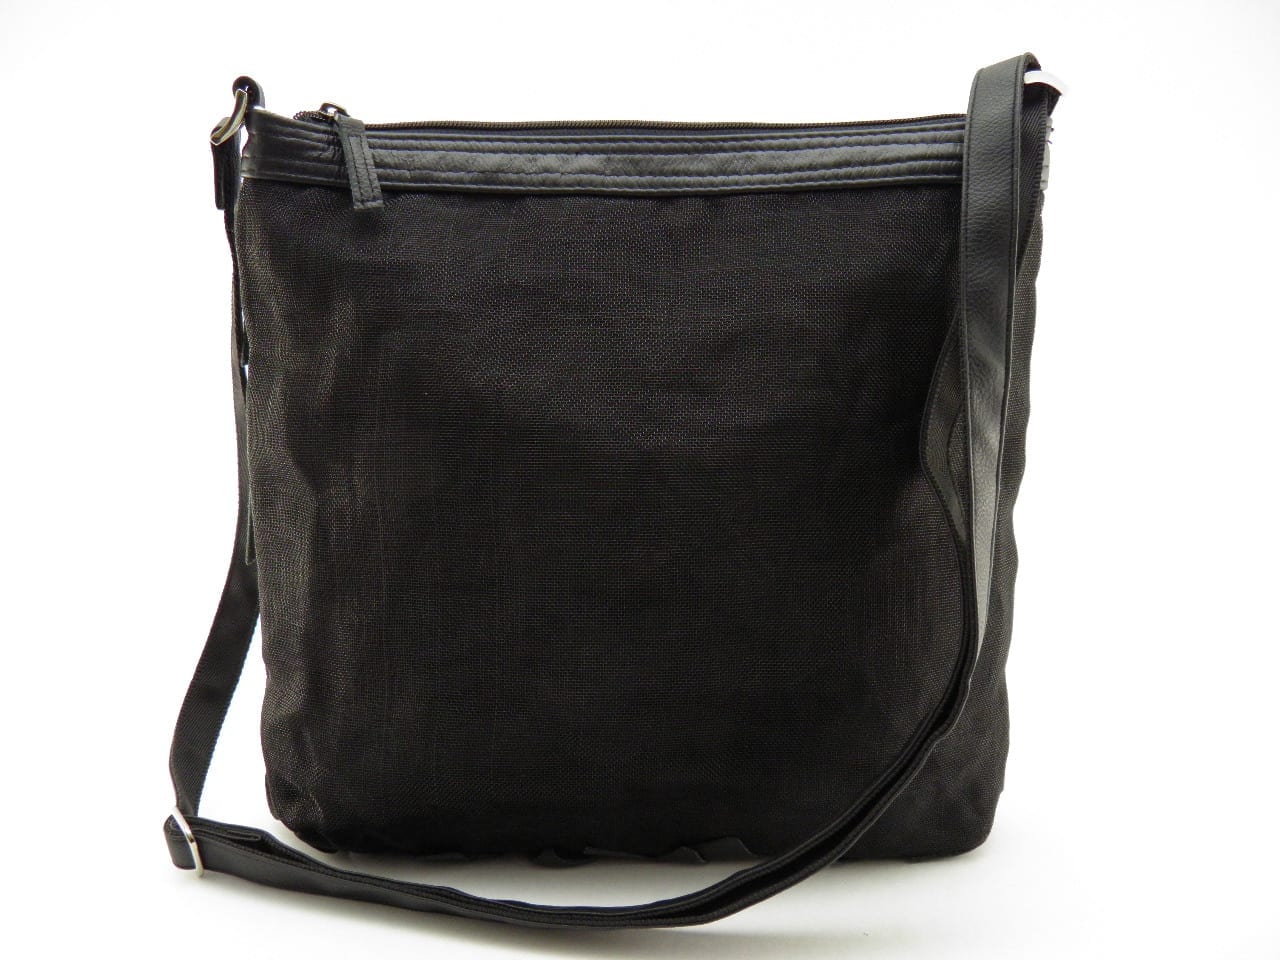 String / Canvas - Eco-friendly Leather Bag | Ethic & chic